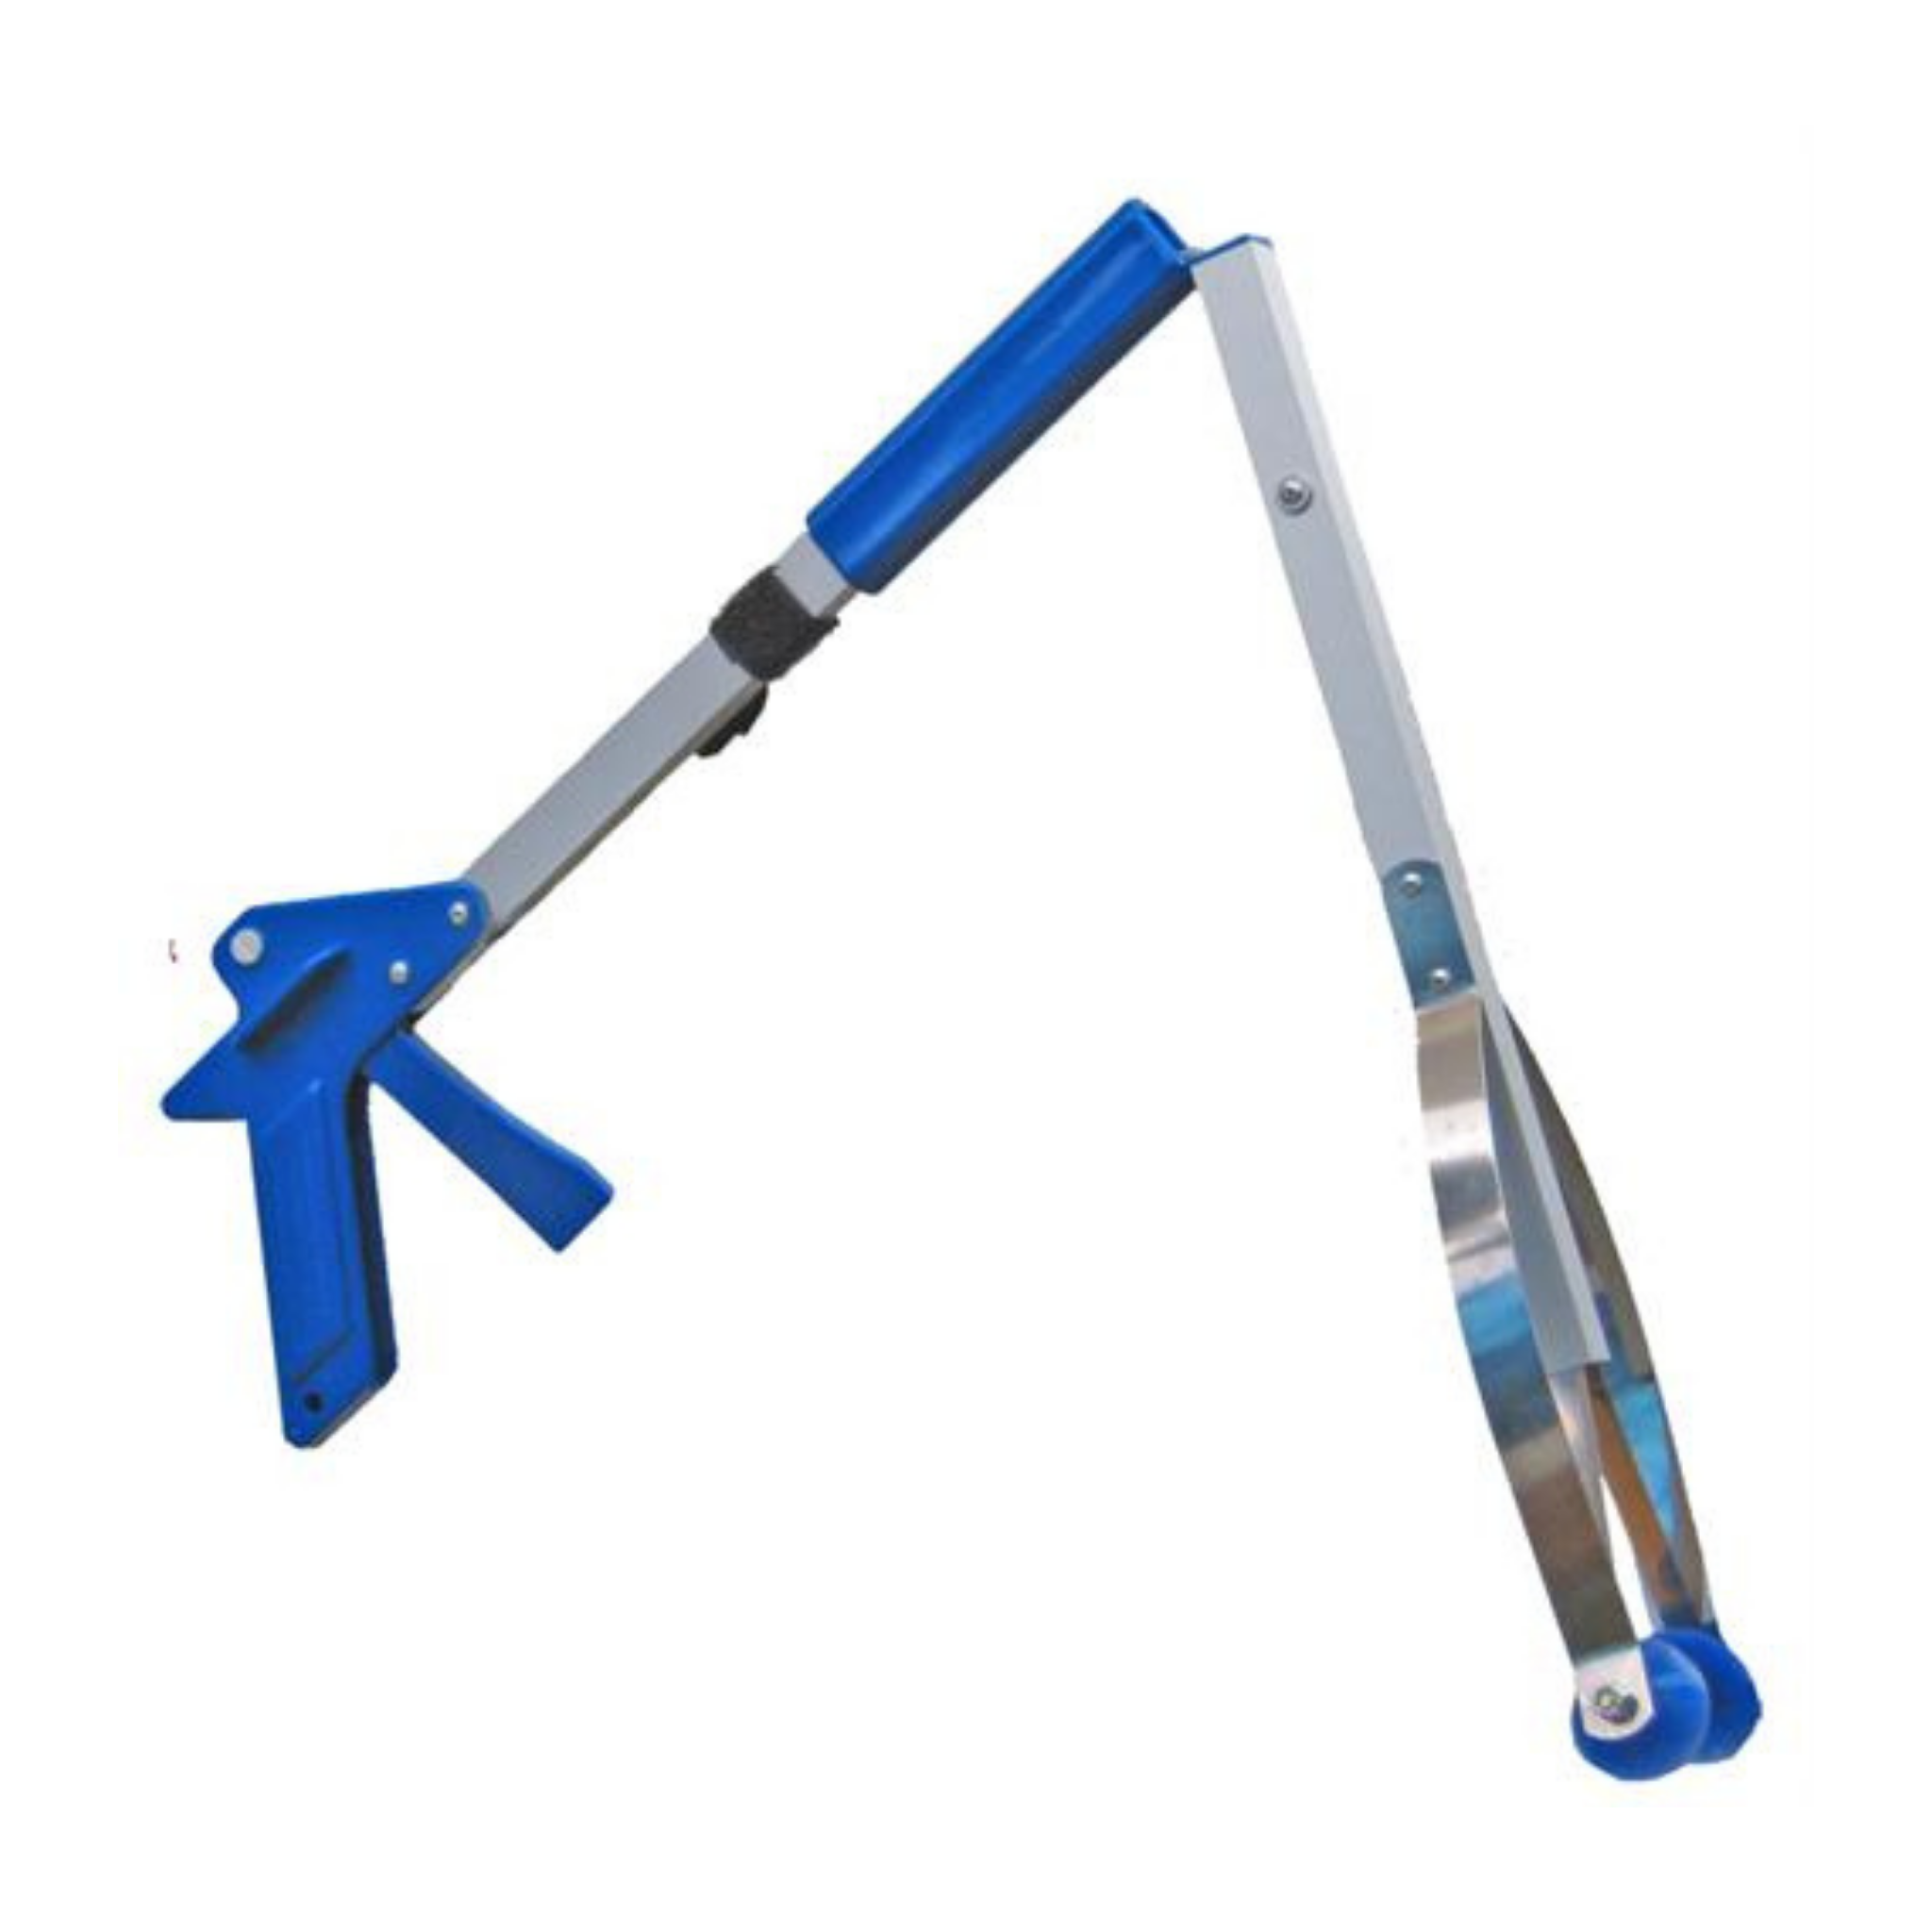 Blue collapsible litter reacher for picking up garbage